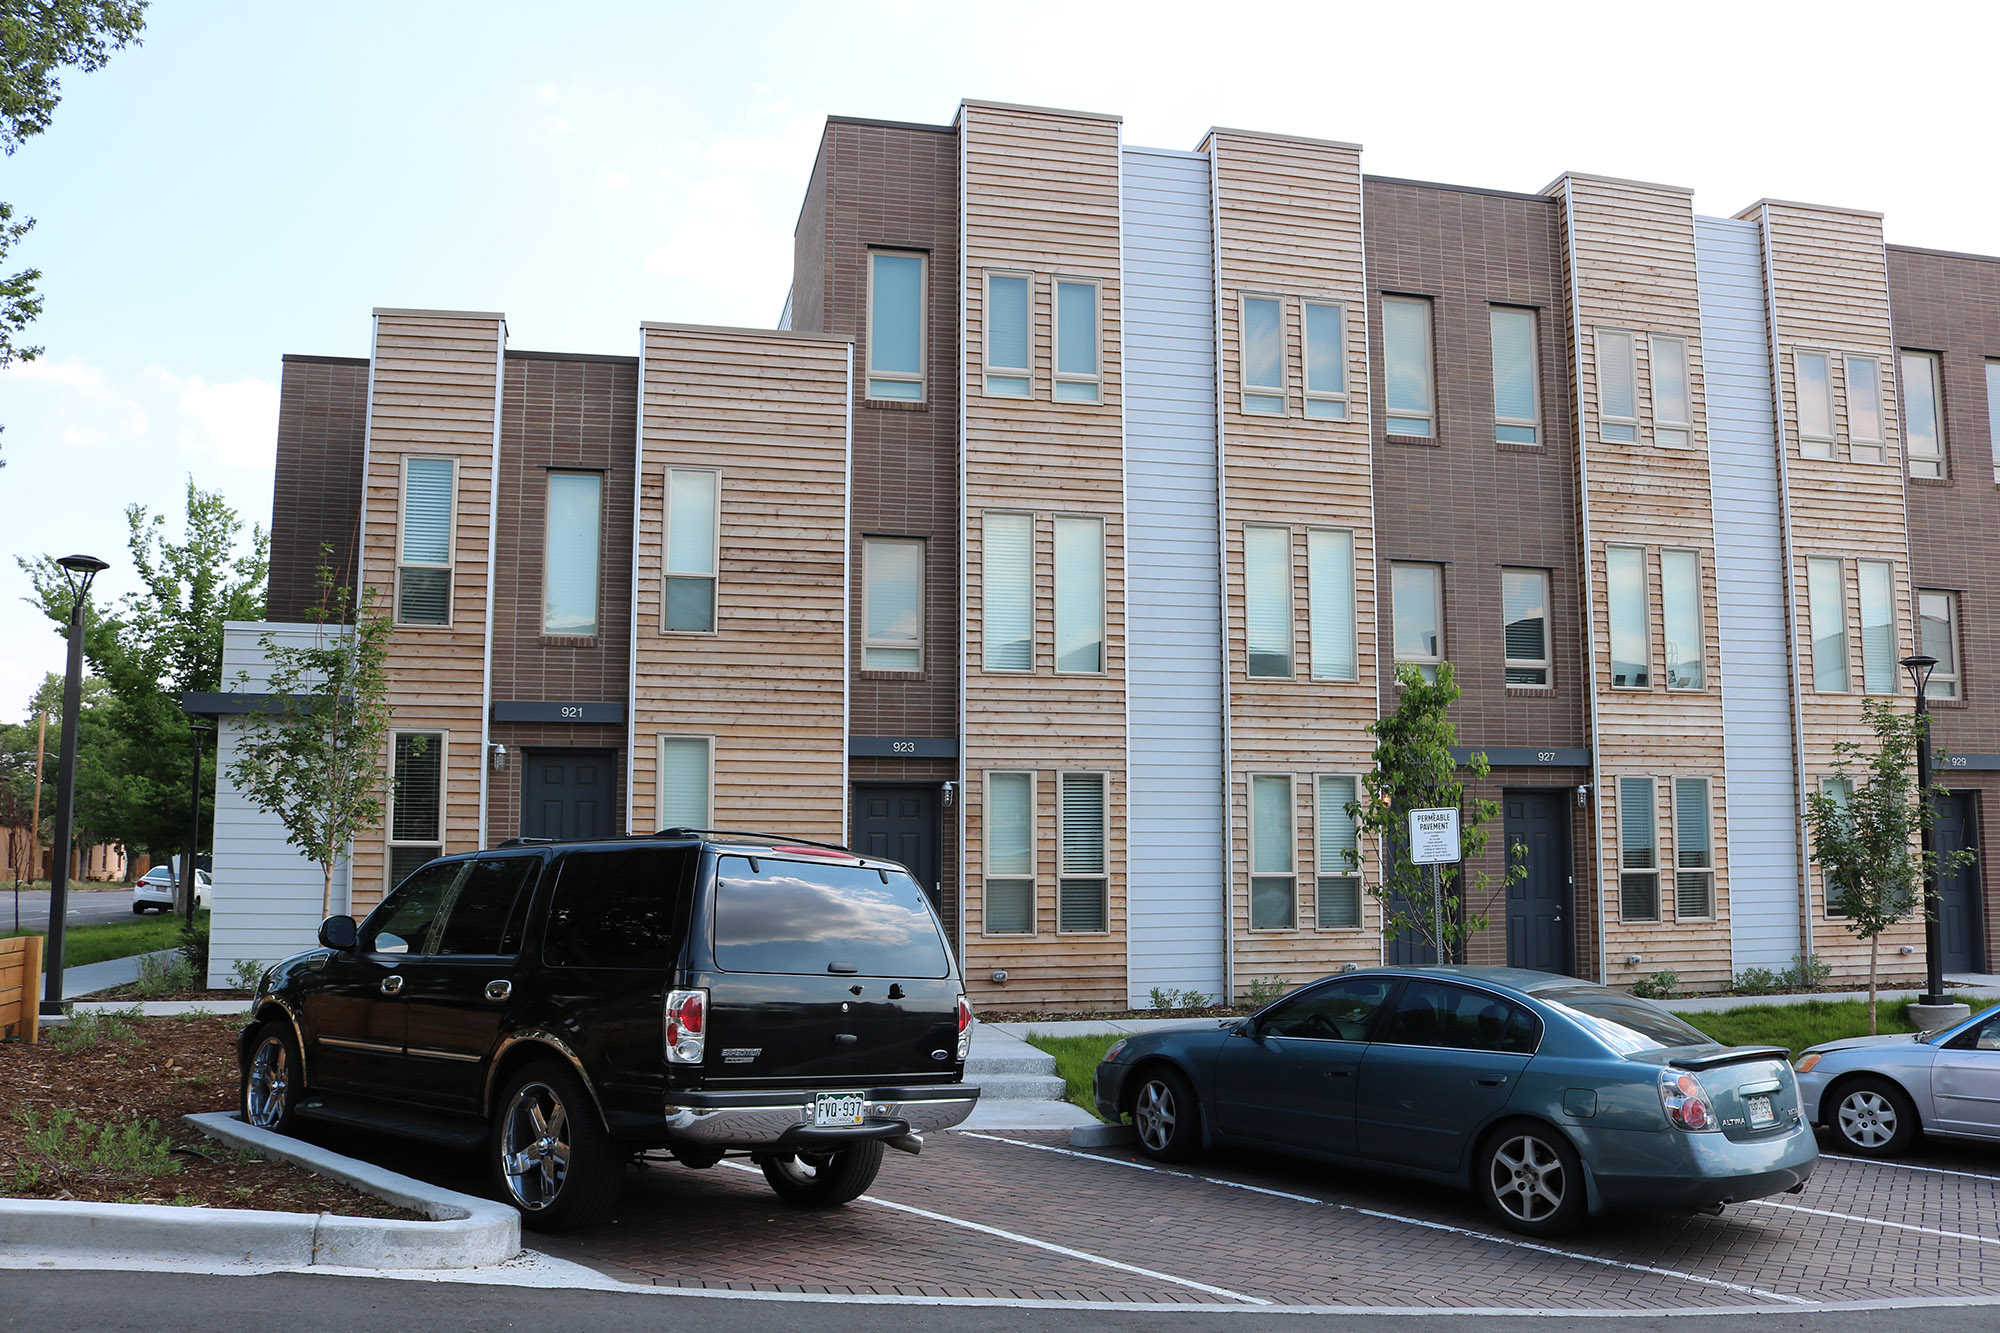 exterior facade view of mariposa townhomes with permeable pavers in parking areas in foreground